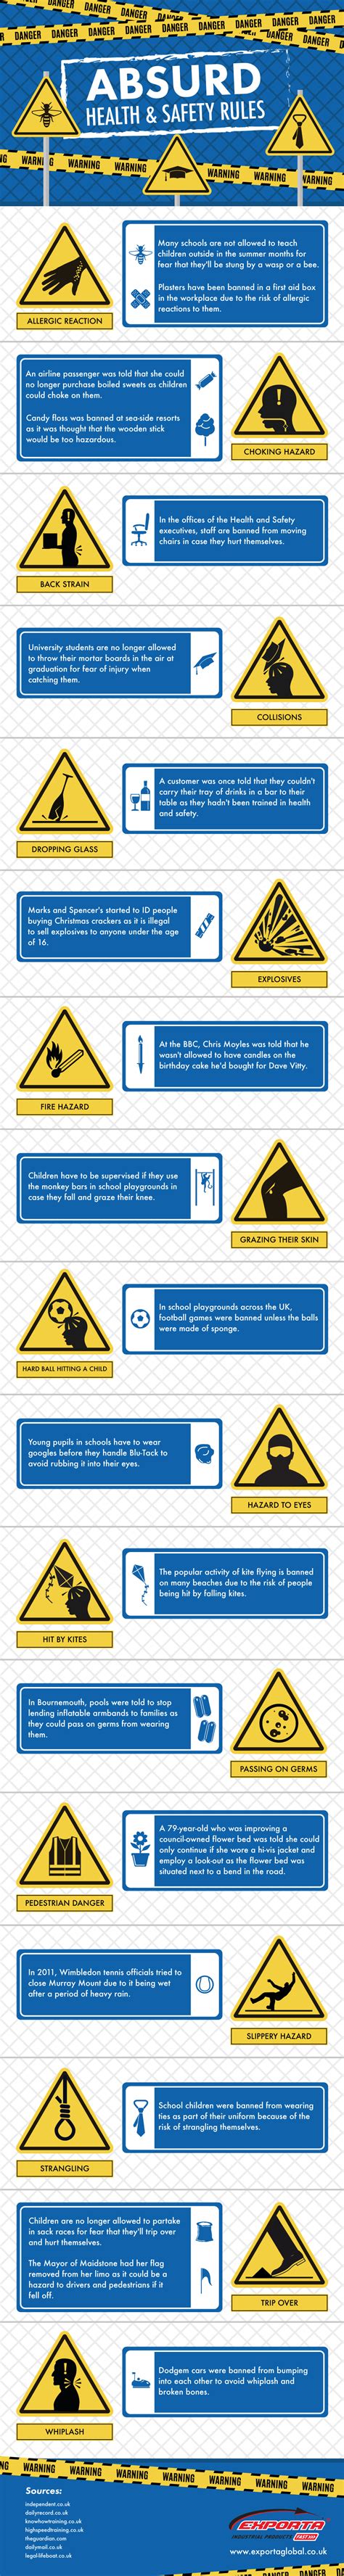 Absurd Health and Safety Rules #Infographic - Visualistan